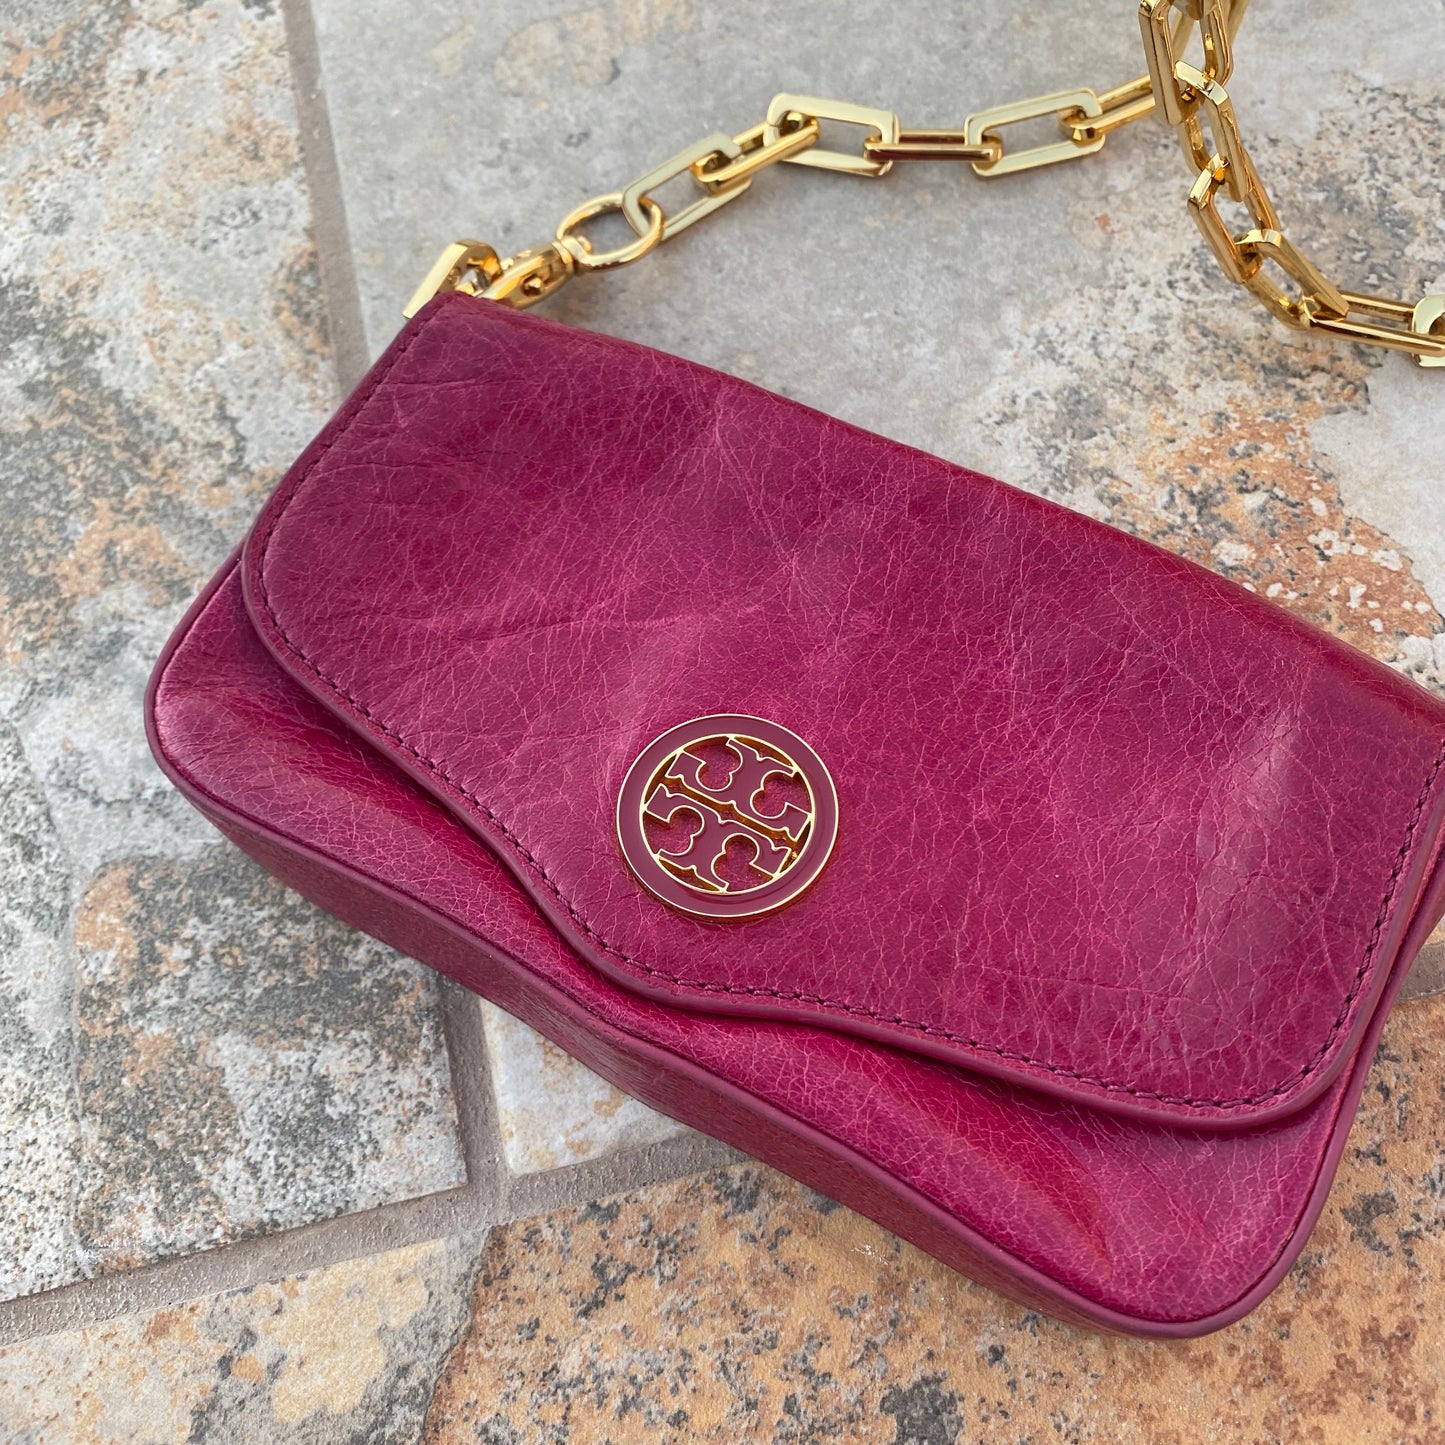 Tory Burch Smooth Leather Small Crossbody Bag